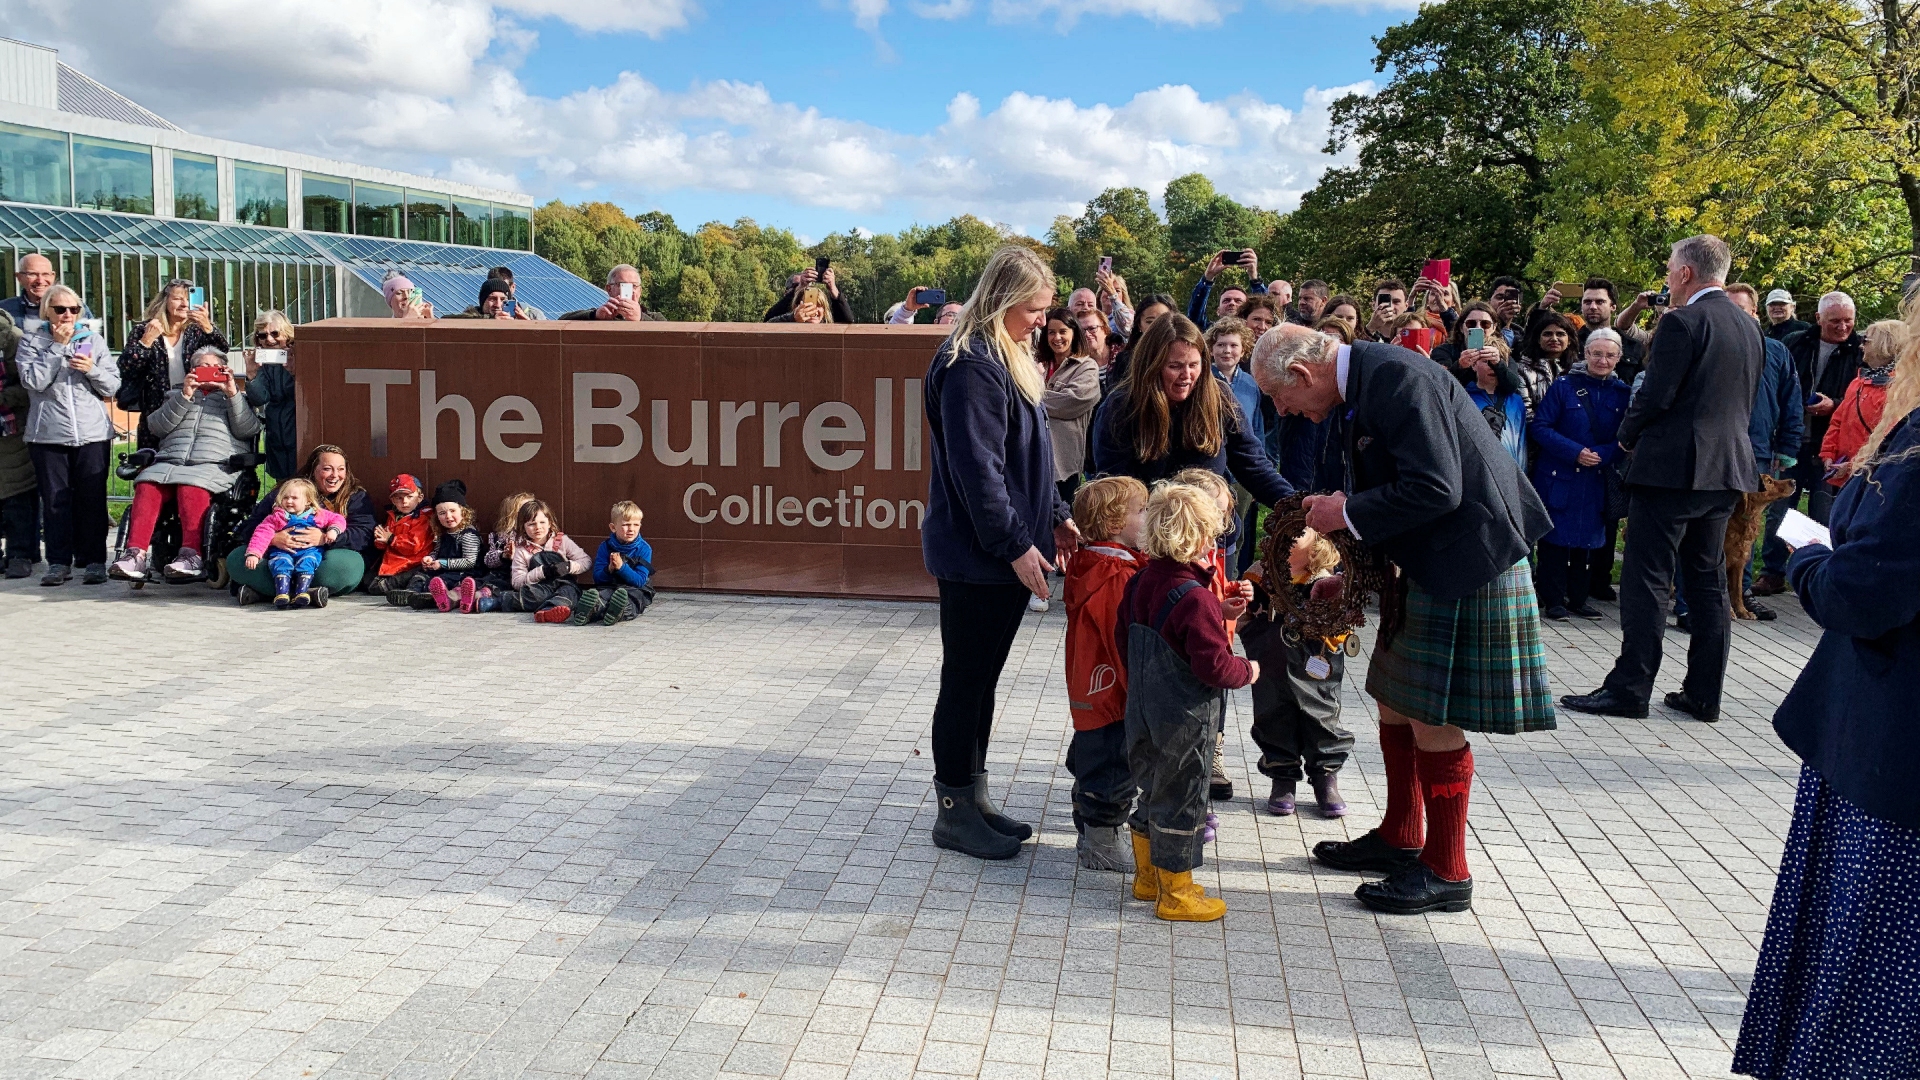 King Charles officially reopened the Burrell Collection in October 2022.